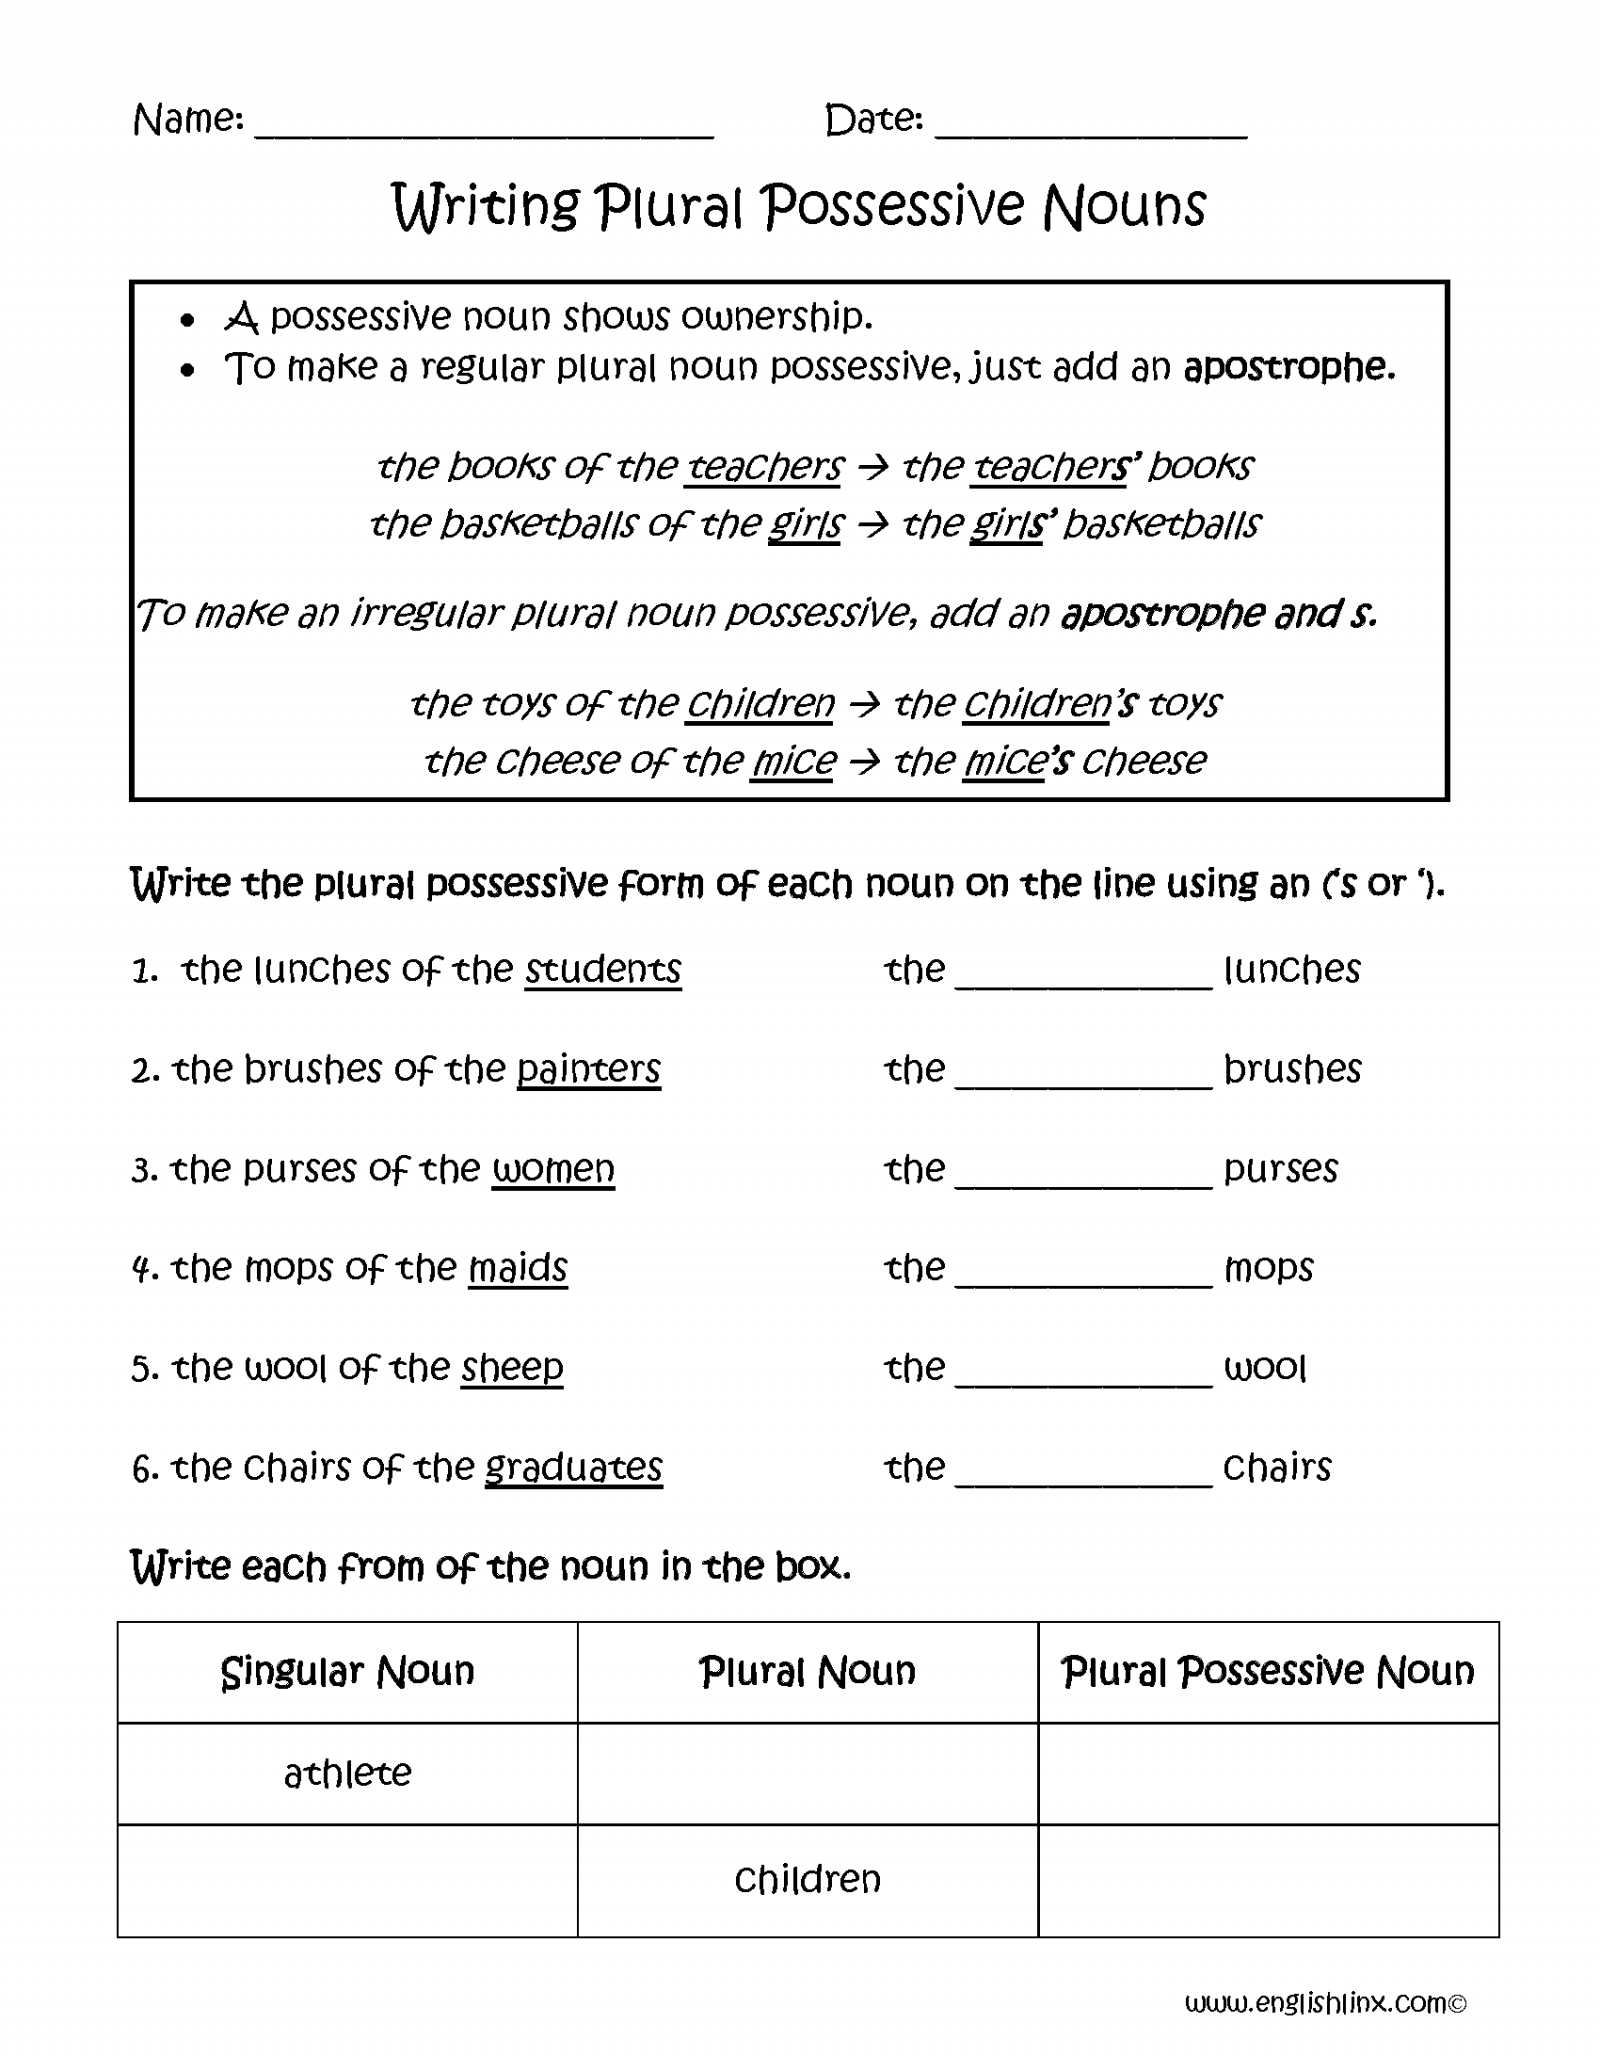 Identify Nouns and Adjectives Worksheets together with Nouns Worksheets forindergarten Mon and Proper Preschoolers